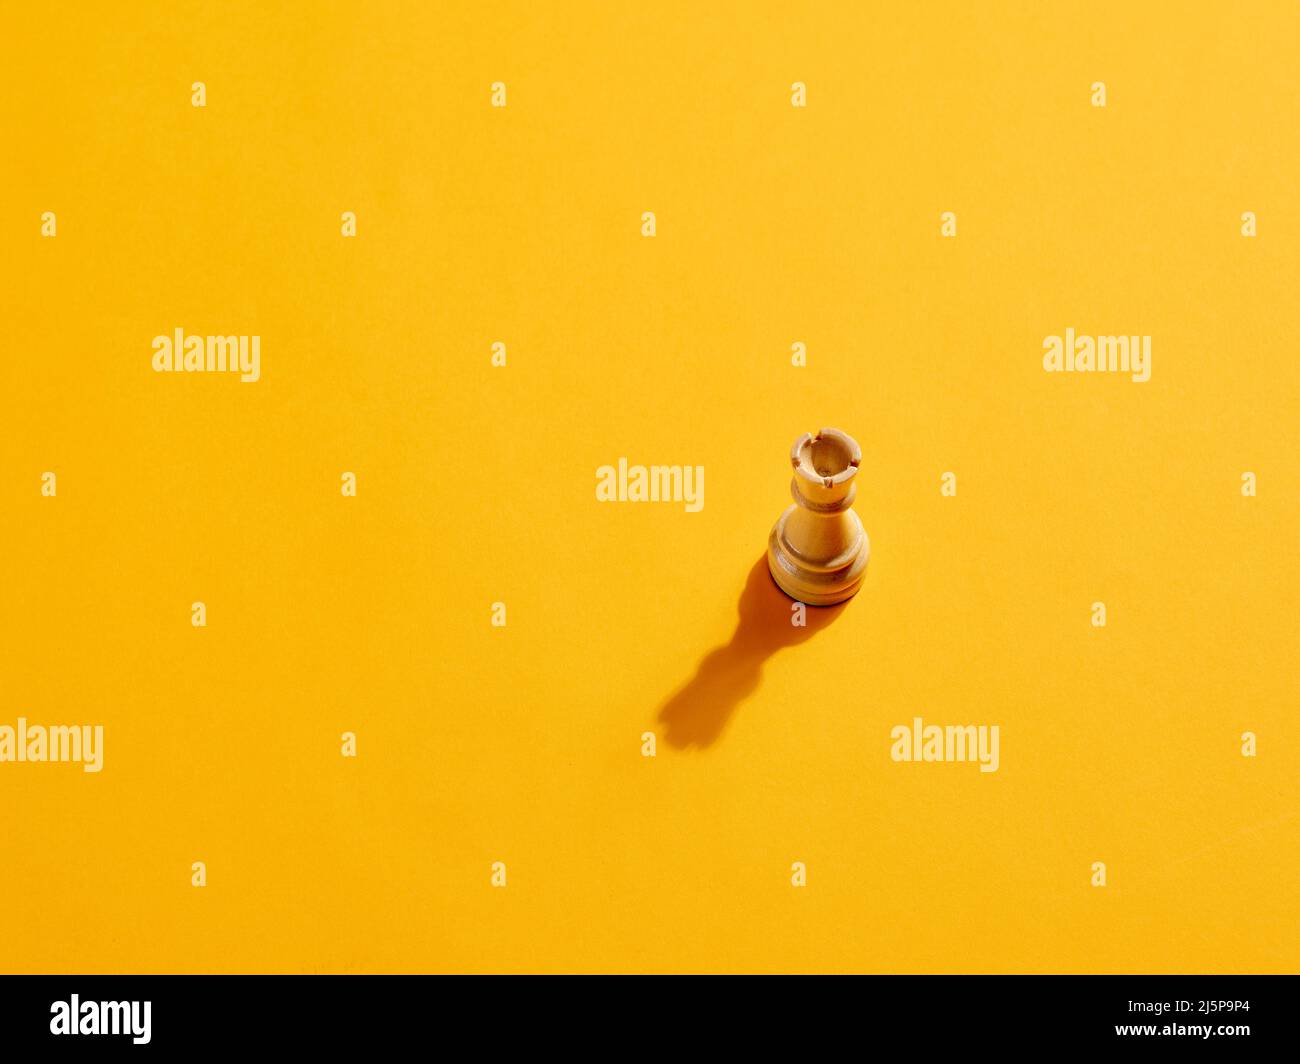 Rook or castle chess piece on yellow background with copy space. Stock Photo